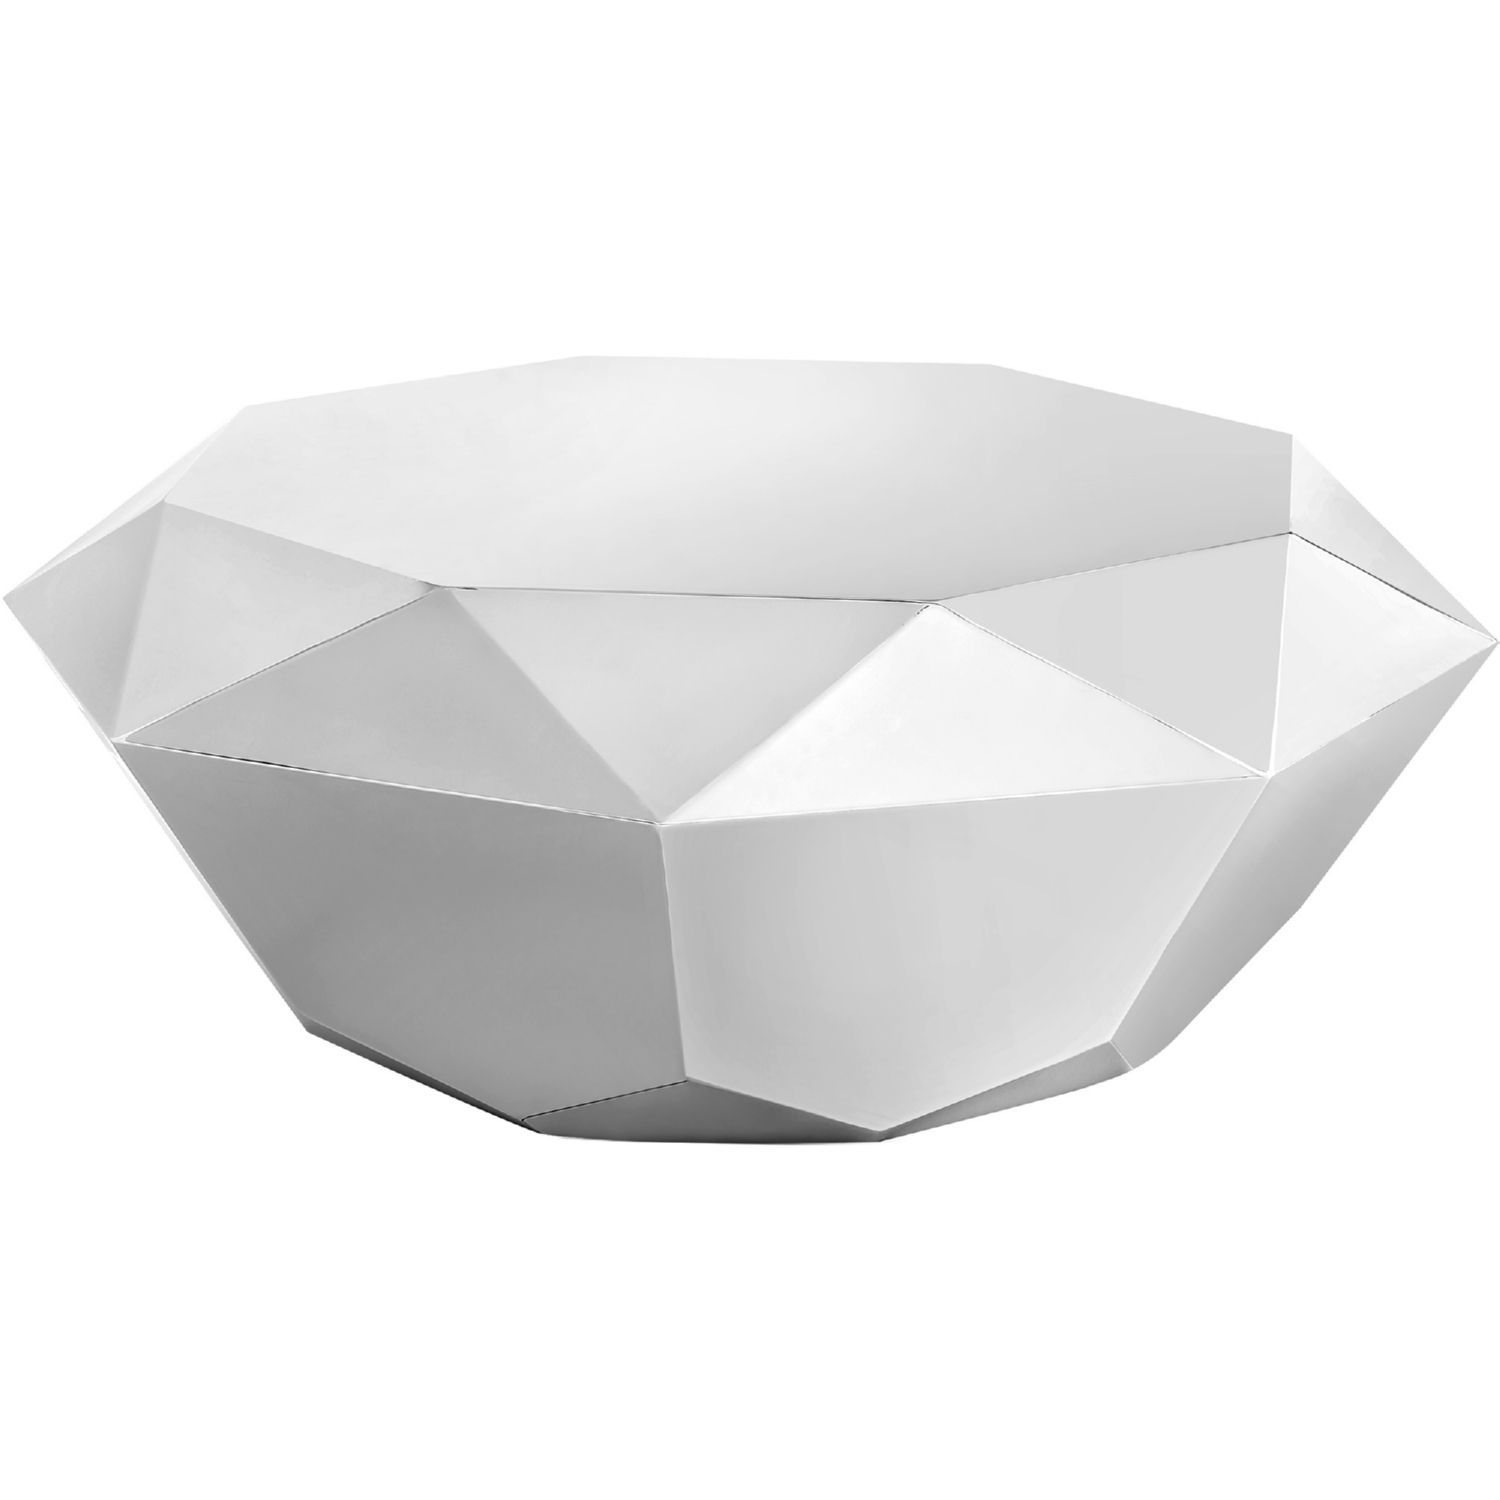 Meridian 222silver C Gemma Diamond Shape Coffee Table In Silver Stainless  Steel Intended For Diamond Shape Coffee Tables (View 15 of 20)